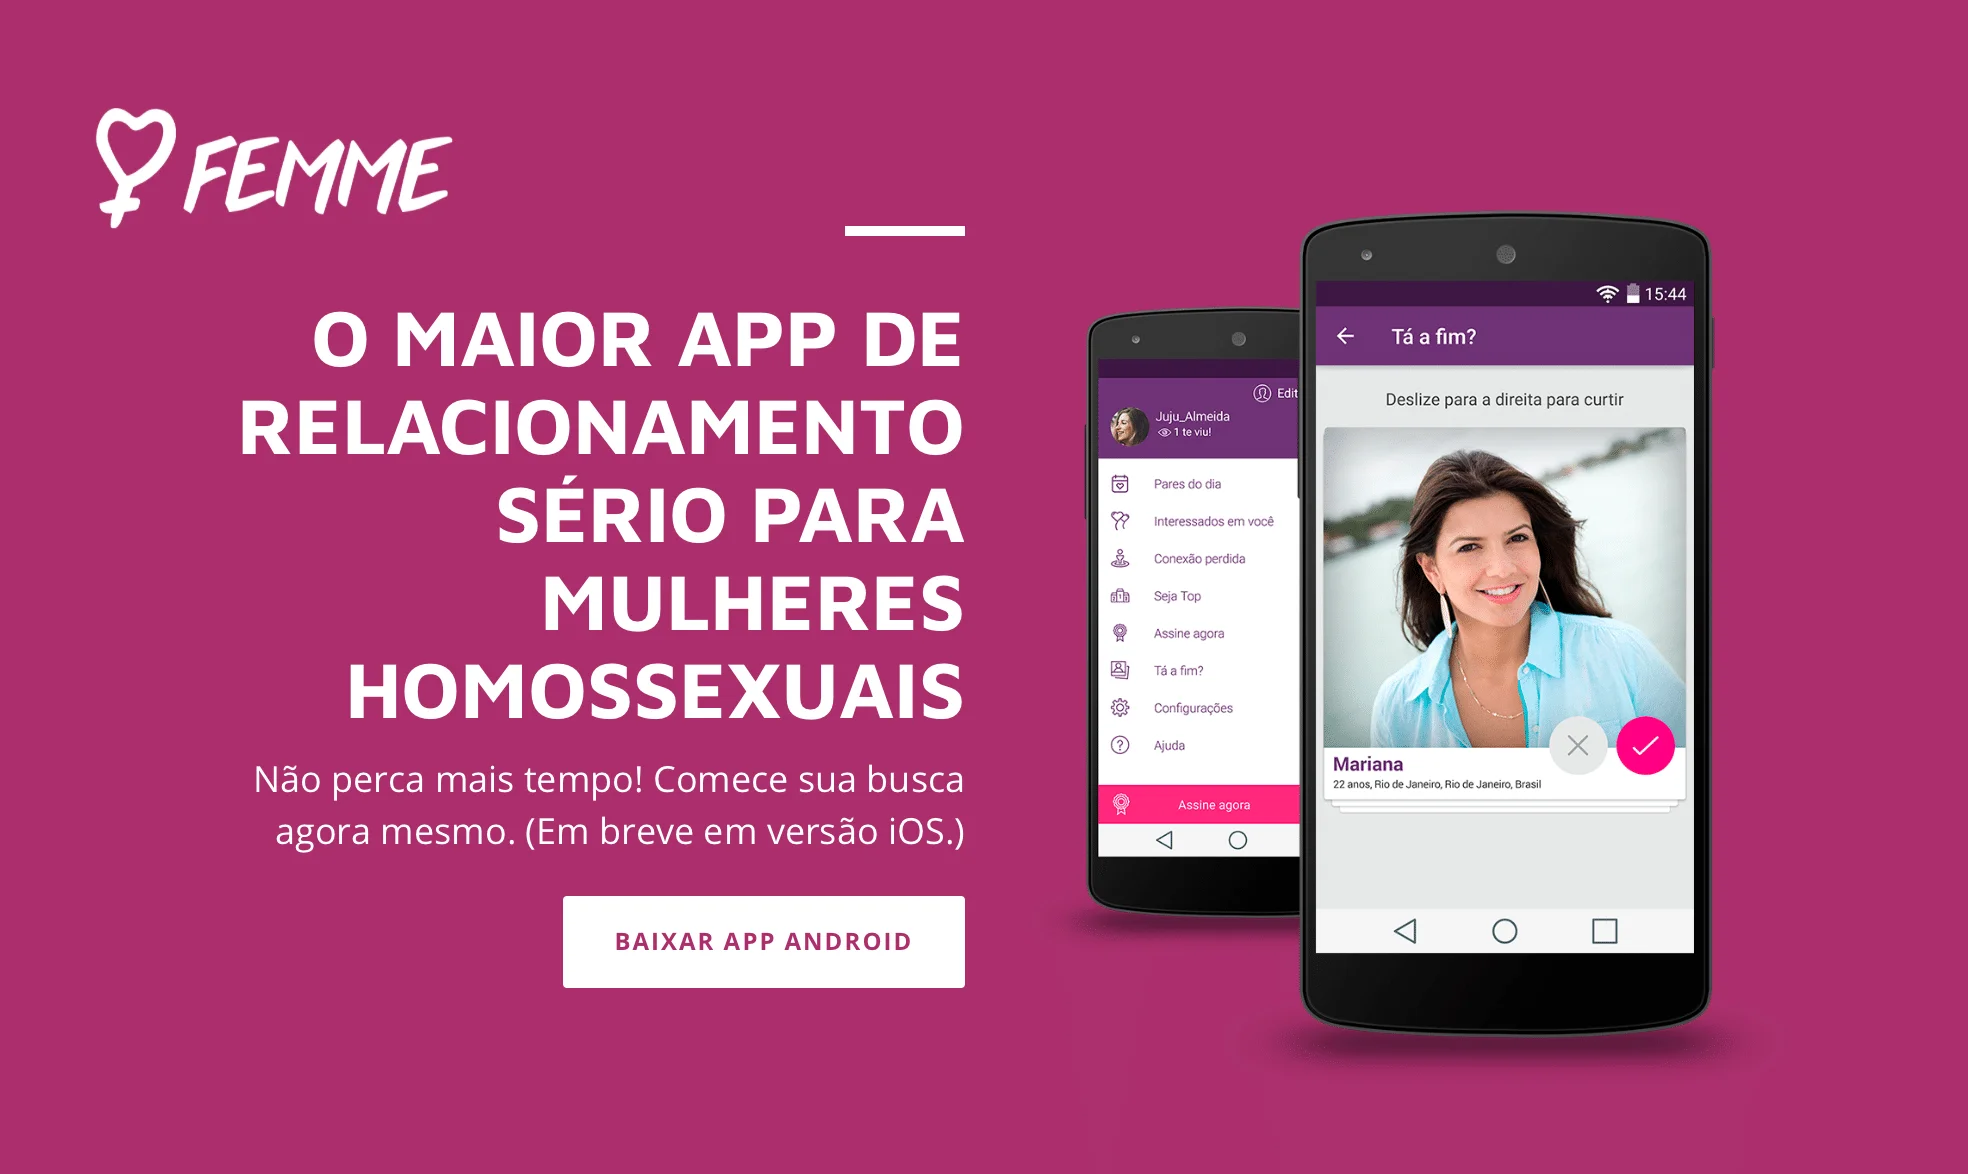 Match Group LatAm Launches Lesbian Dating App Femme In Brazil ...